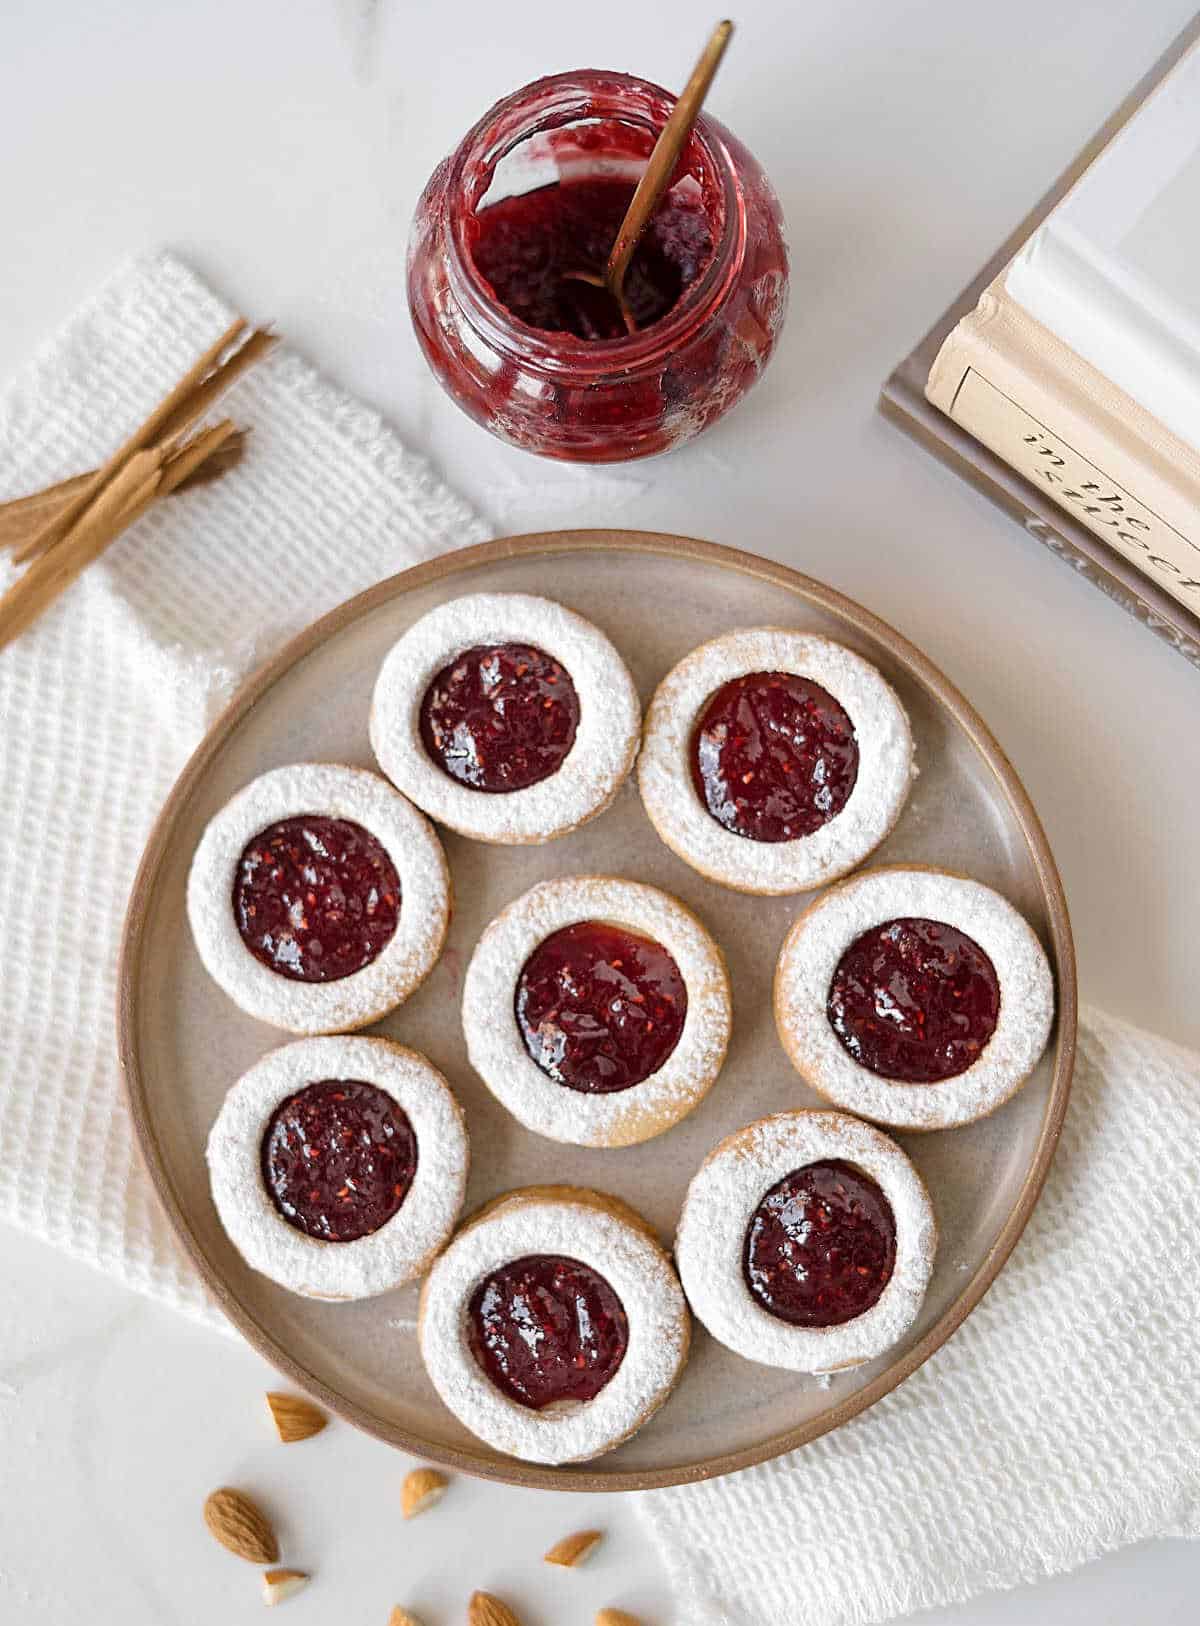 Several raspberry linzer cookies on a brown plate. White surface, white kitchen towel. A jam jar and cinnamon sticks.